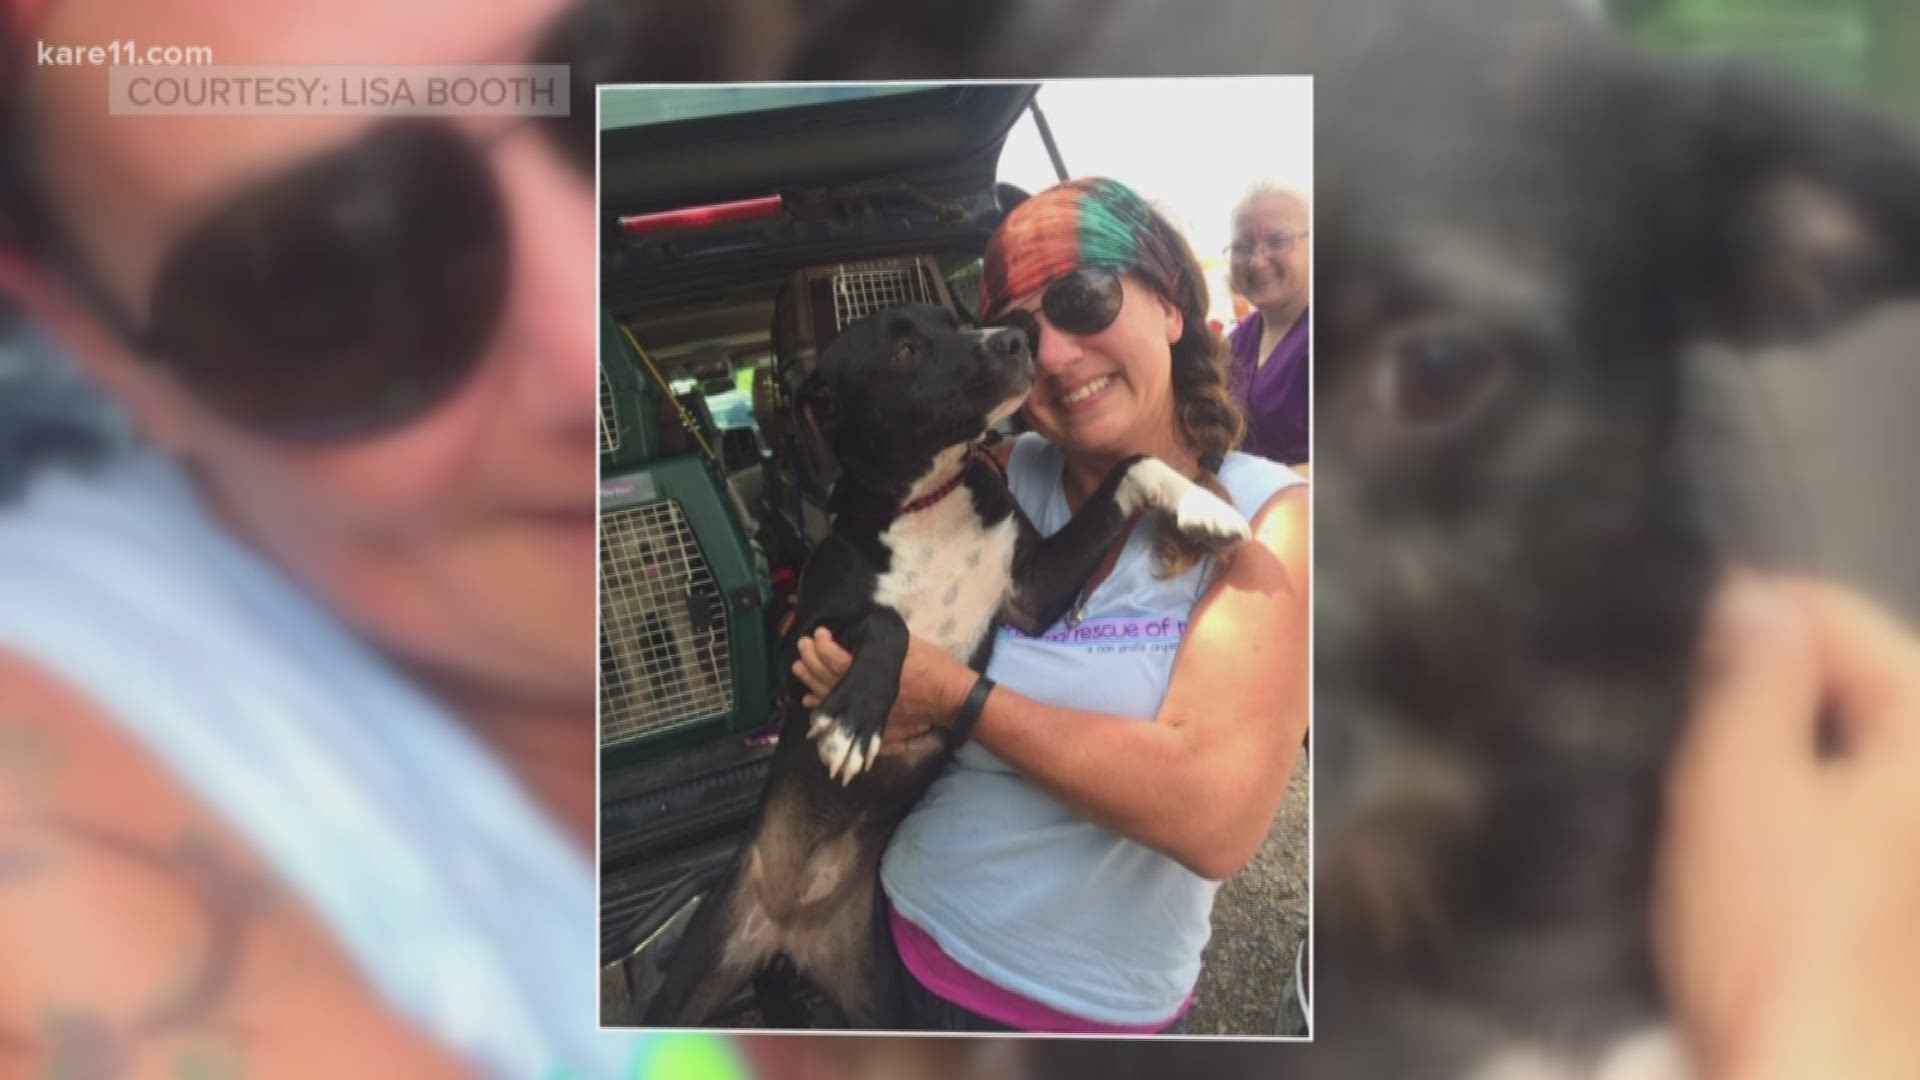 Lisa Booth launched Good Karma Animal Rescue in her own home and has since saved 1,000 dogs. https://kare11.tv/2E8wt2E